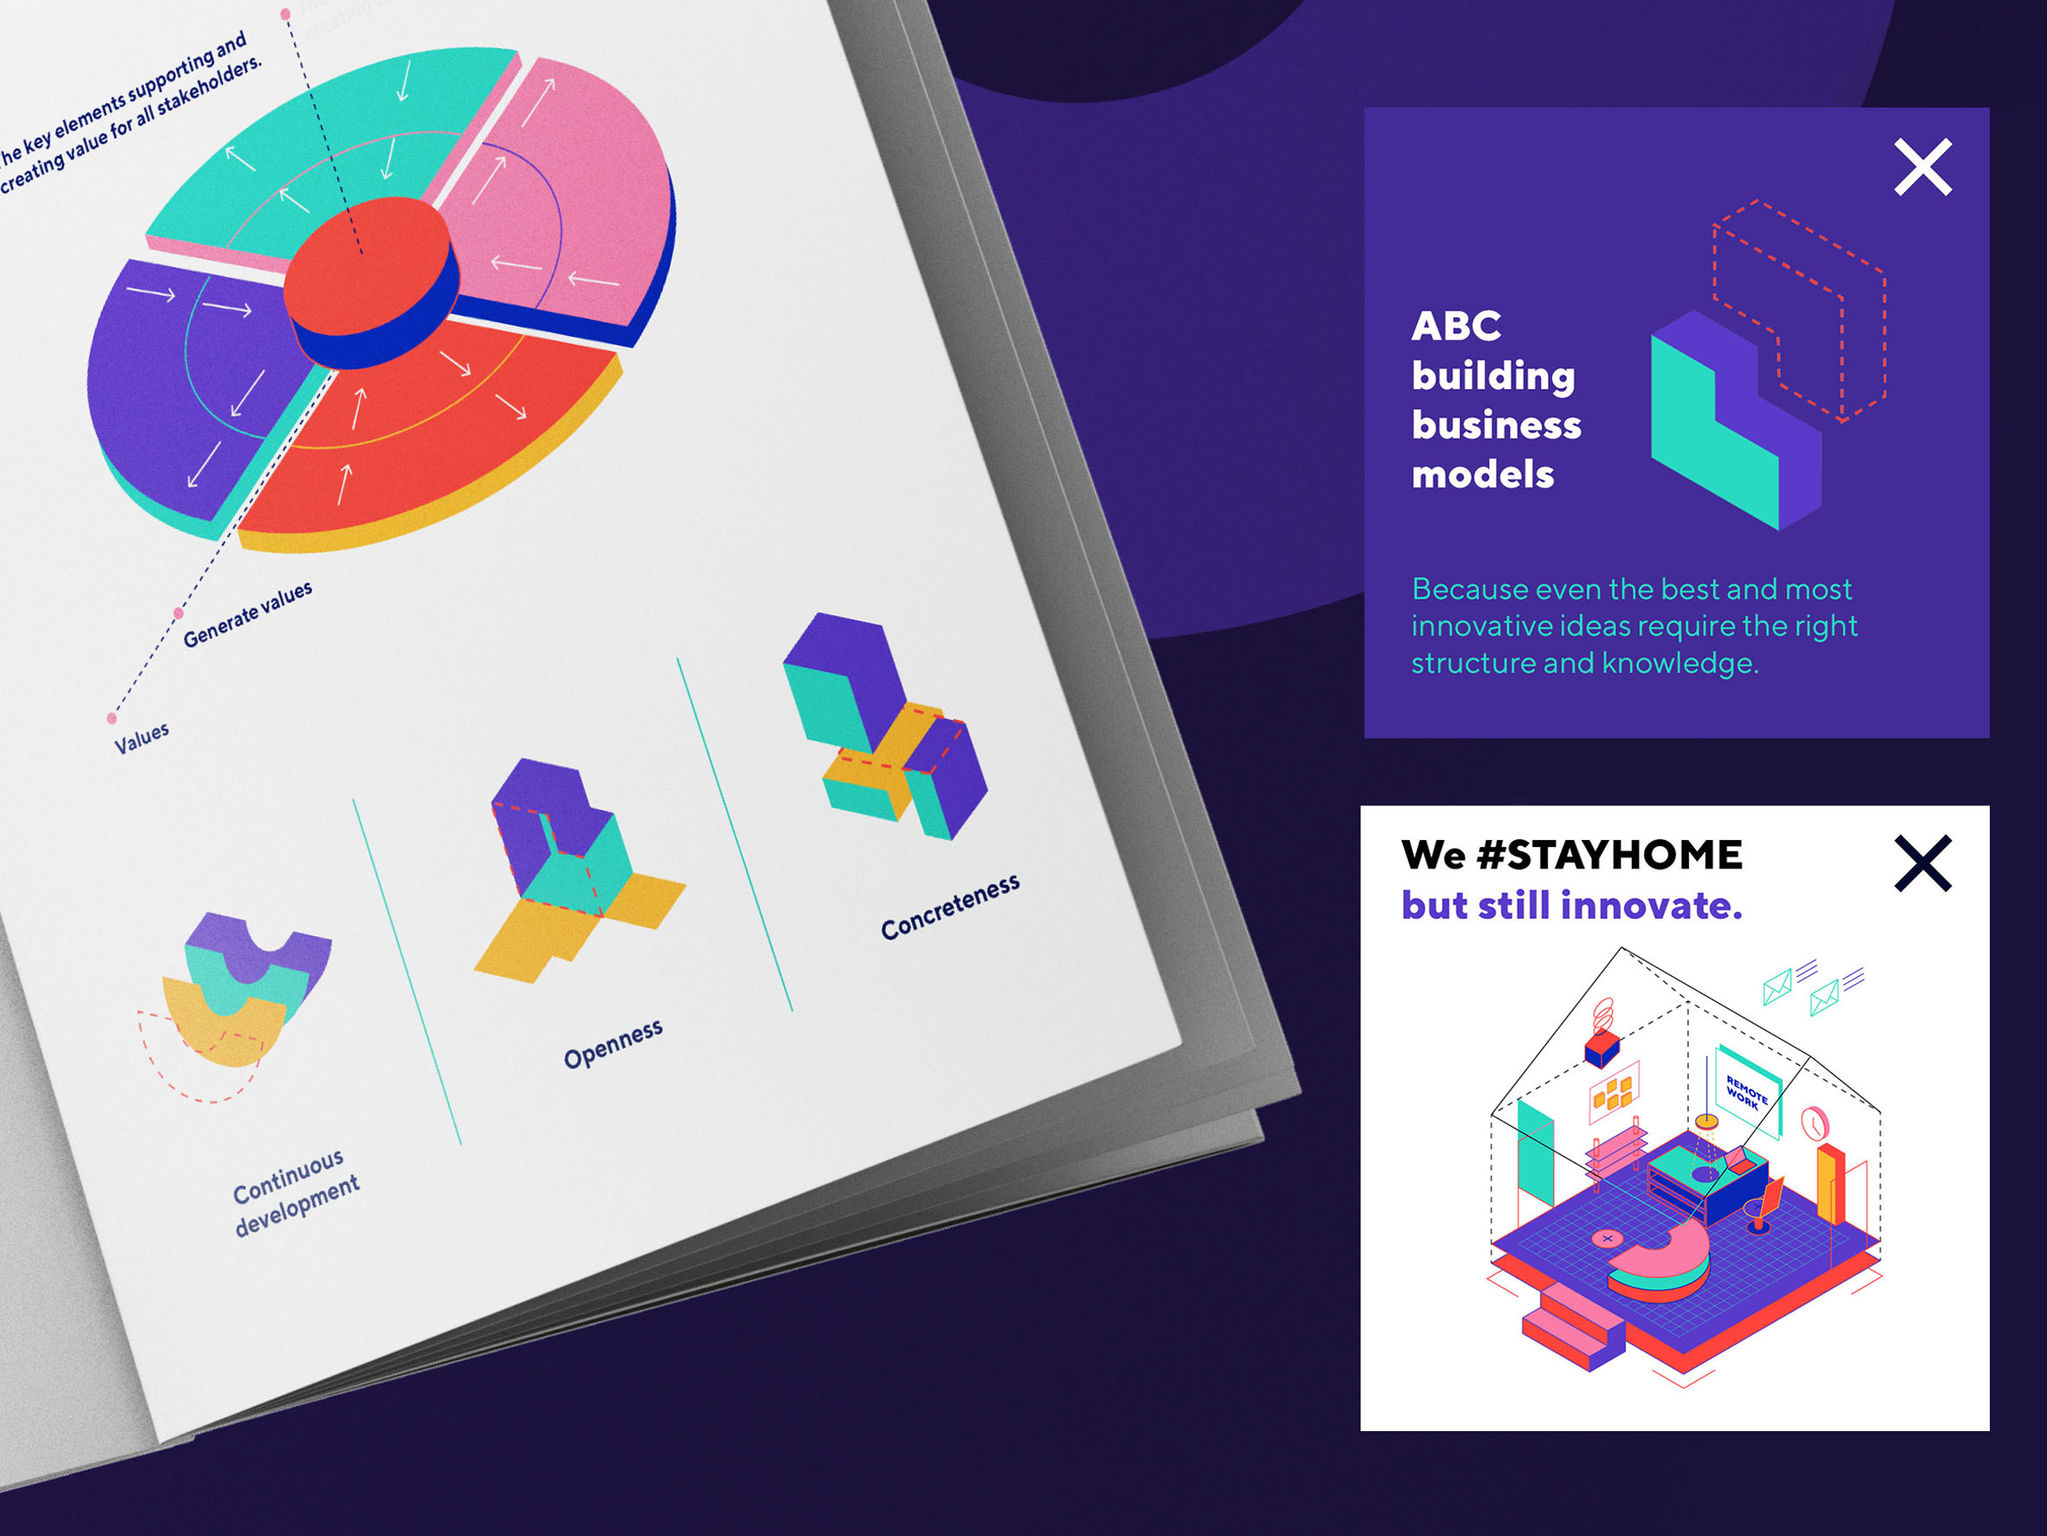 Creative Labs identity: How to design innovation?